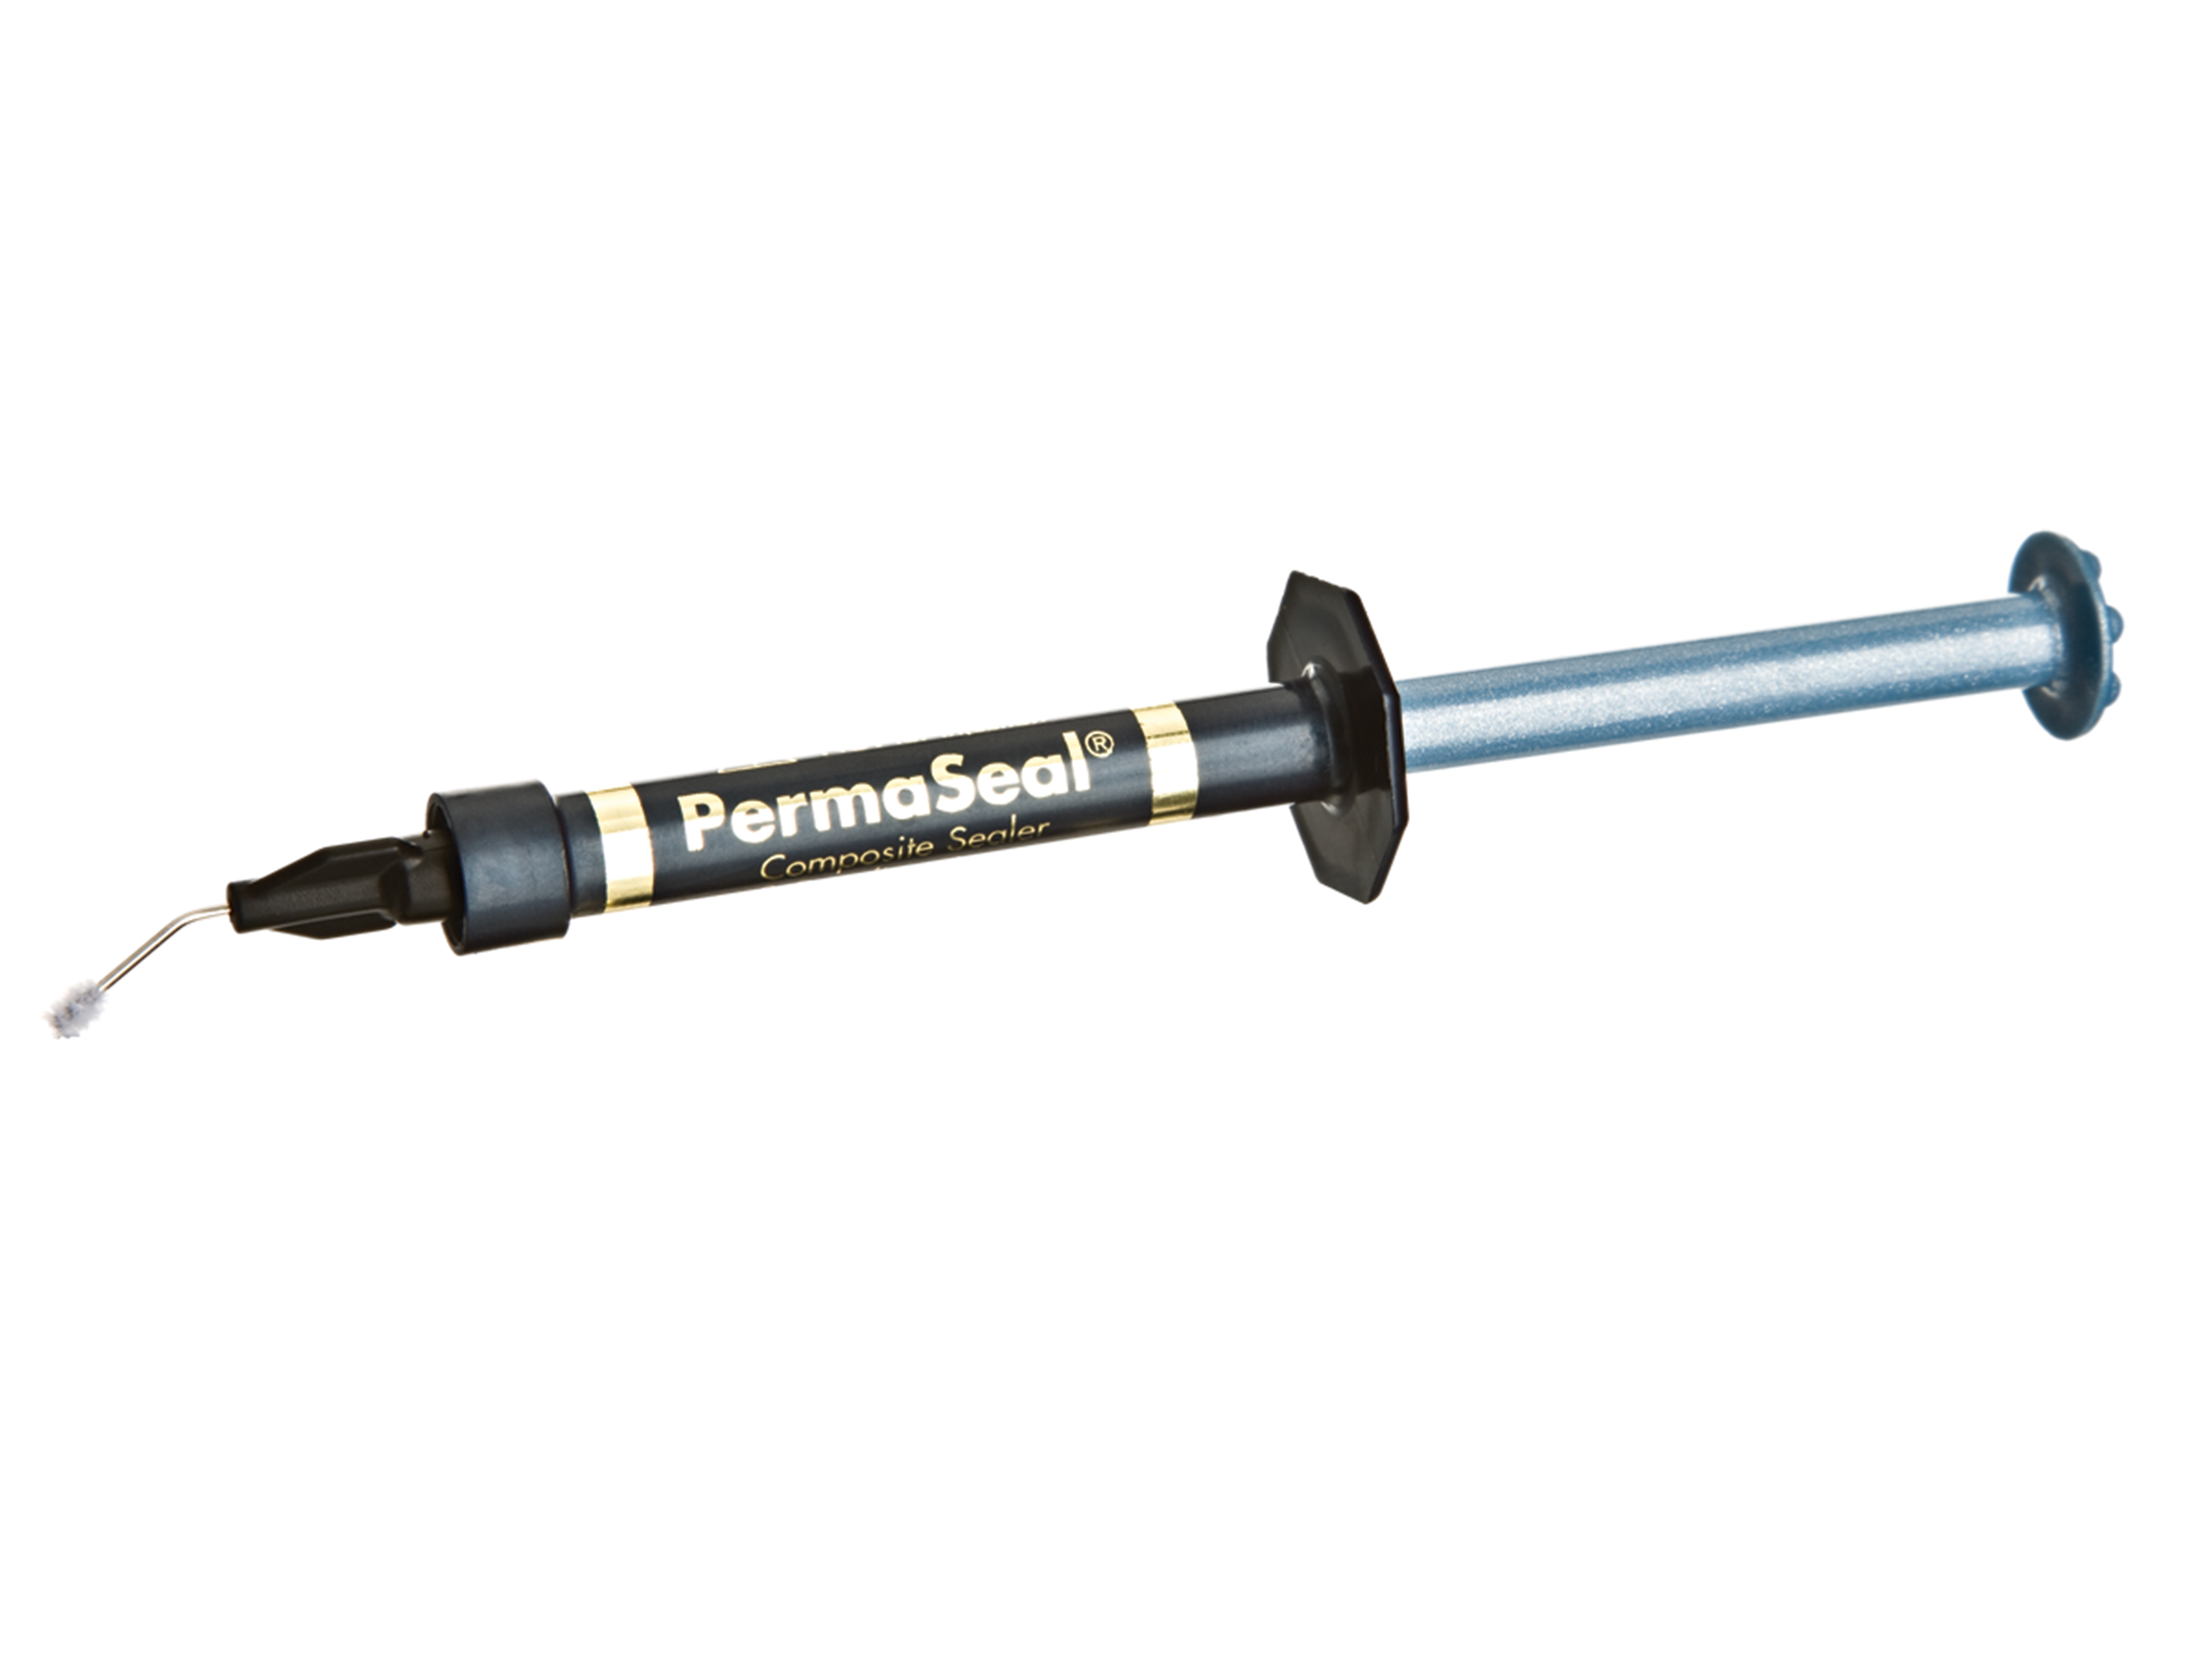 PermaSeal syringe with tip